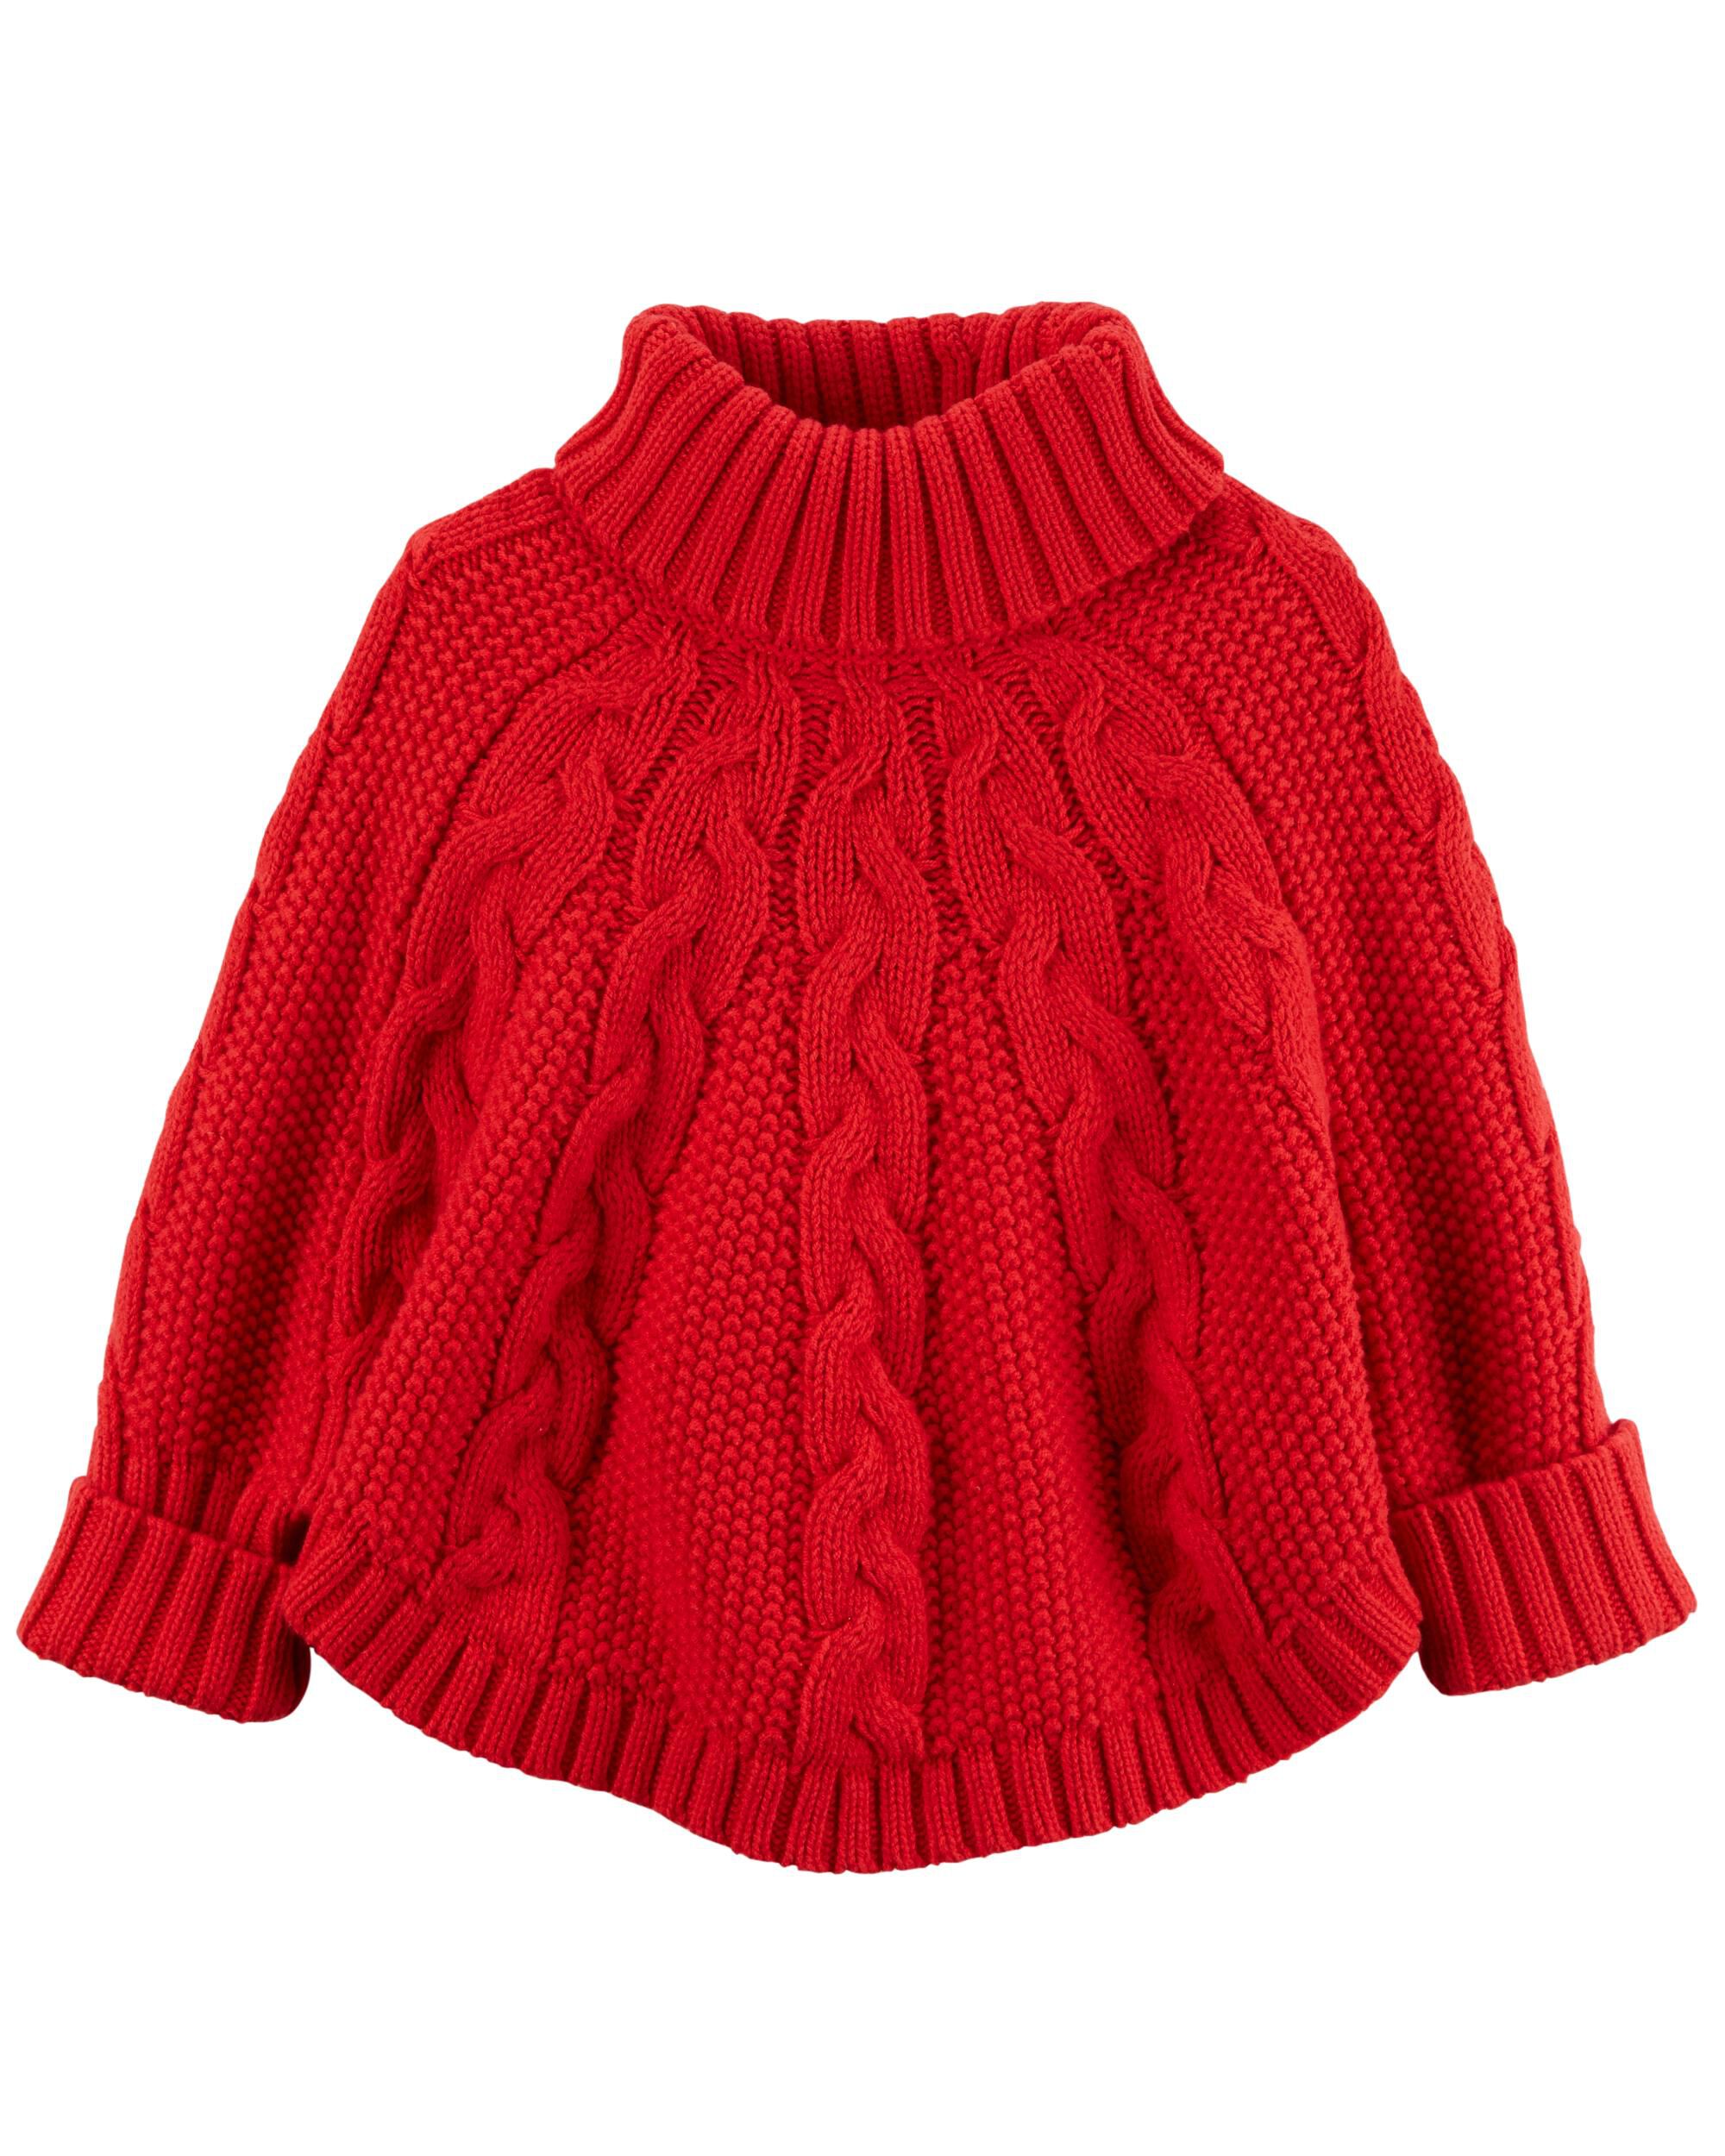 *CLEARANCE* *SPECIAL OFFER* Children's Kids Girls Knitted Poncho